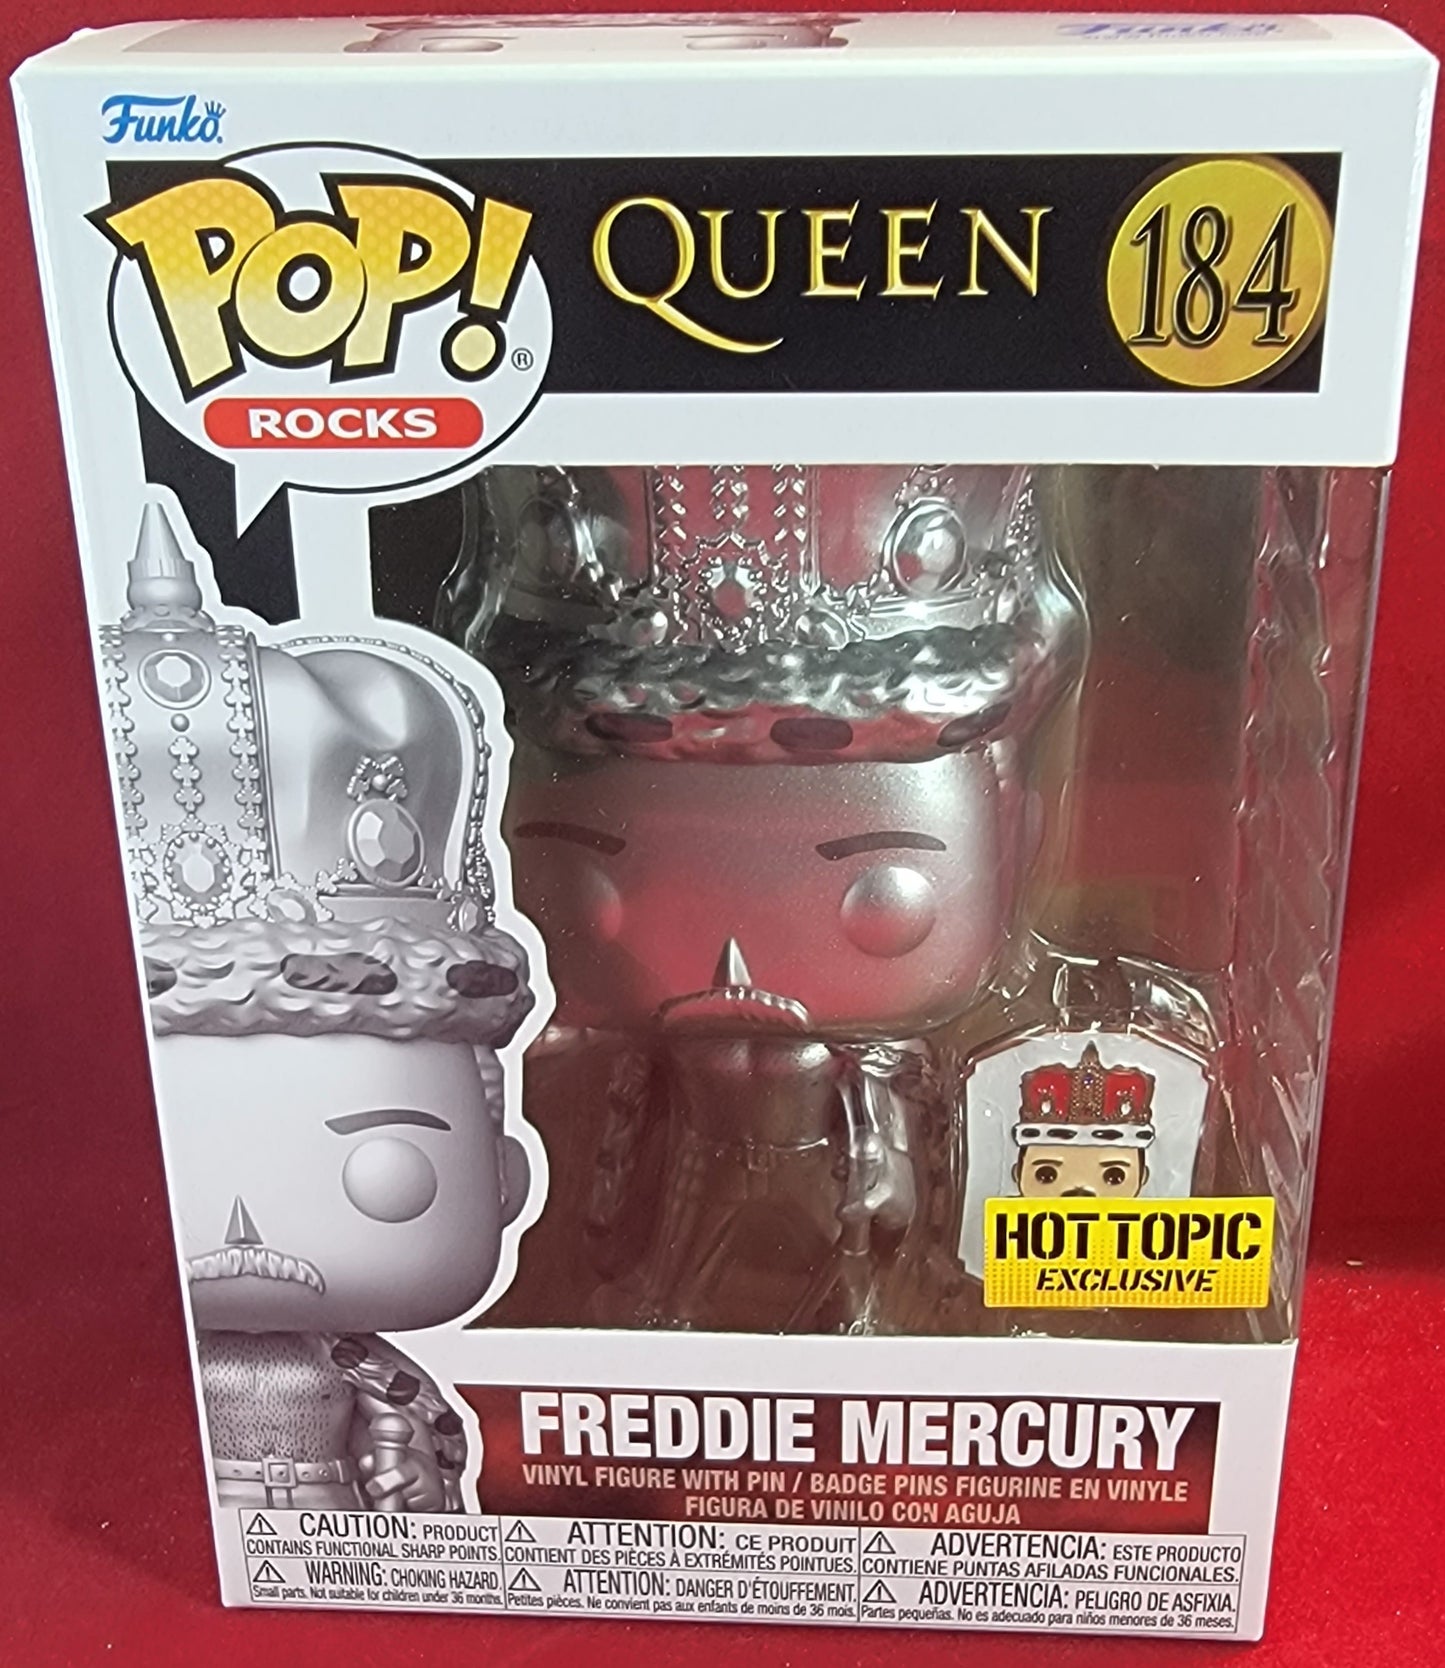 Freddie mercury hot topic exclusive funko # 184 (nib)
brand new silver metallic mercury from band queen. pop has Freddie in his king outfit covered in silver. pop has a few lite scratches on the plastic and will be shipped in a compatible pop protector.